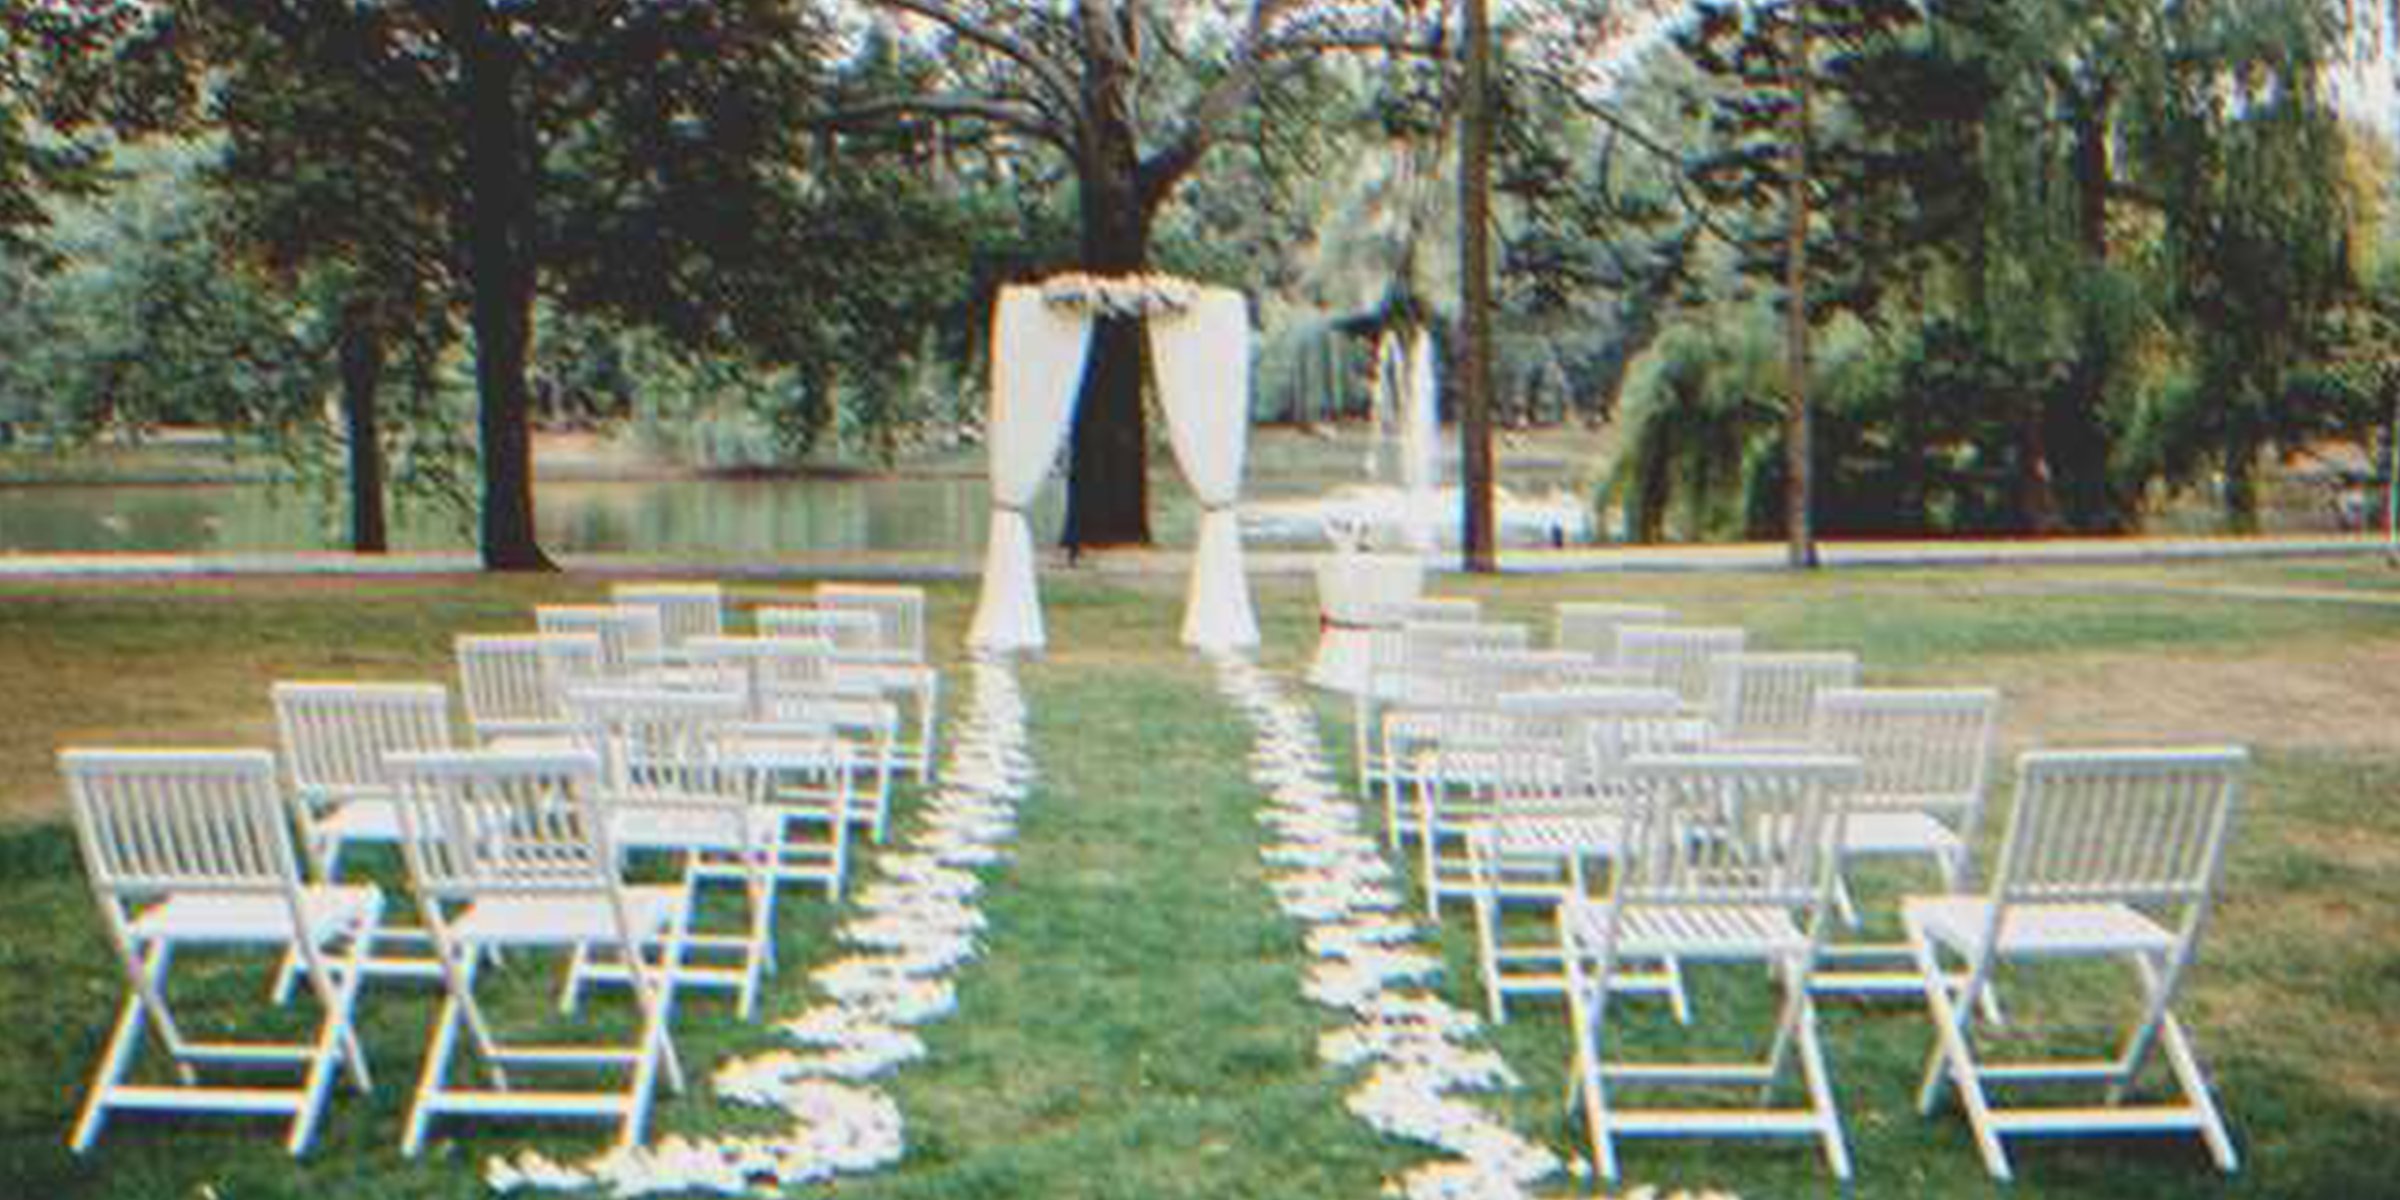 The setting for a wedding | Source: Getty Images